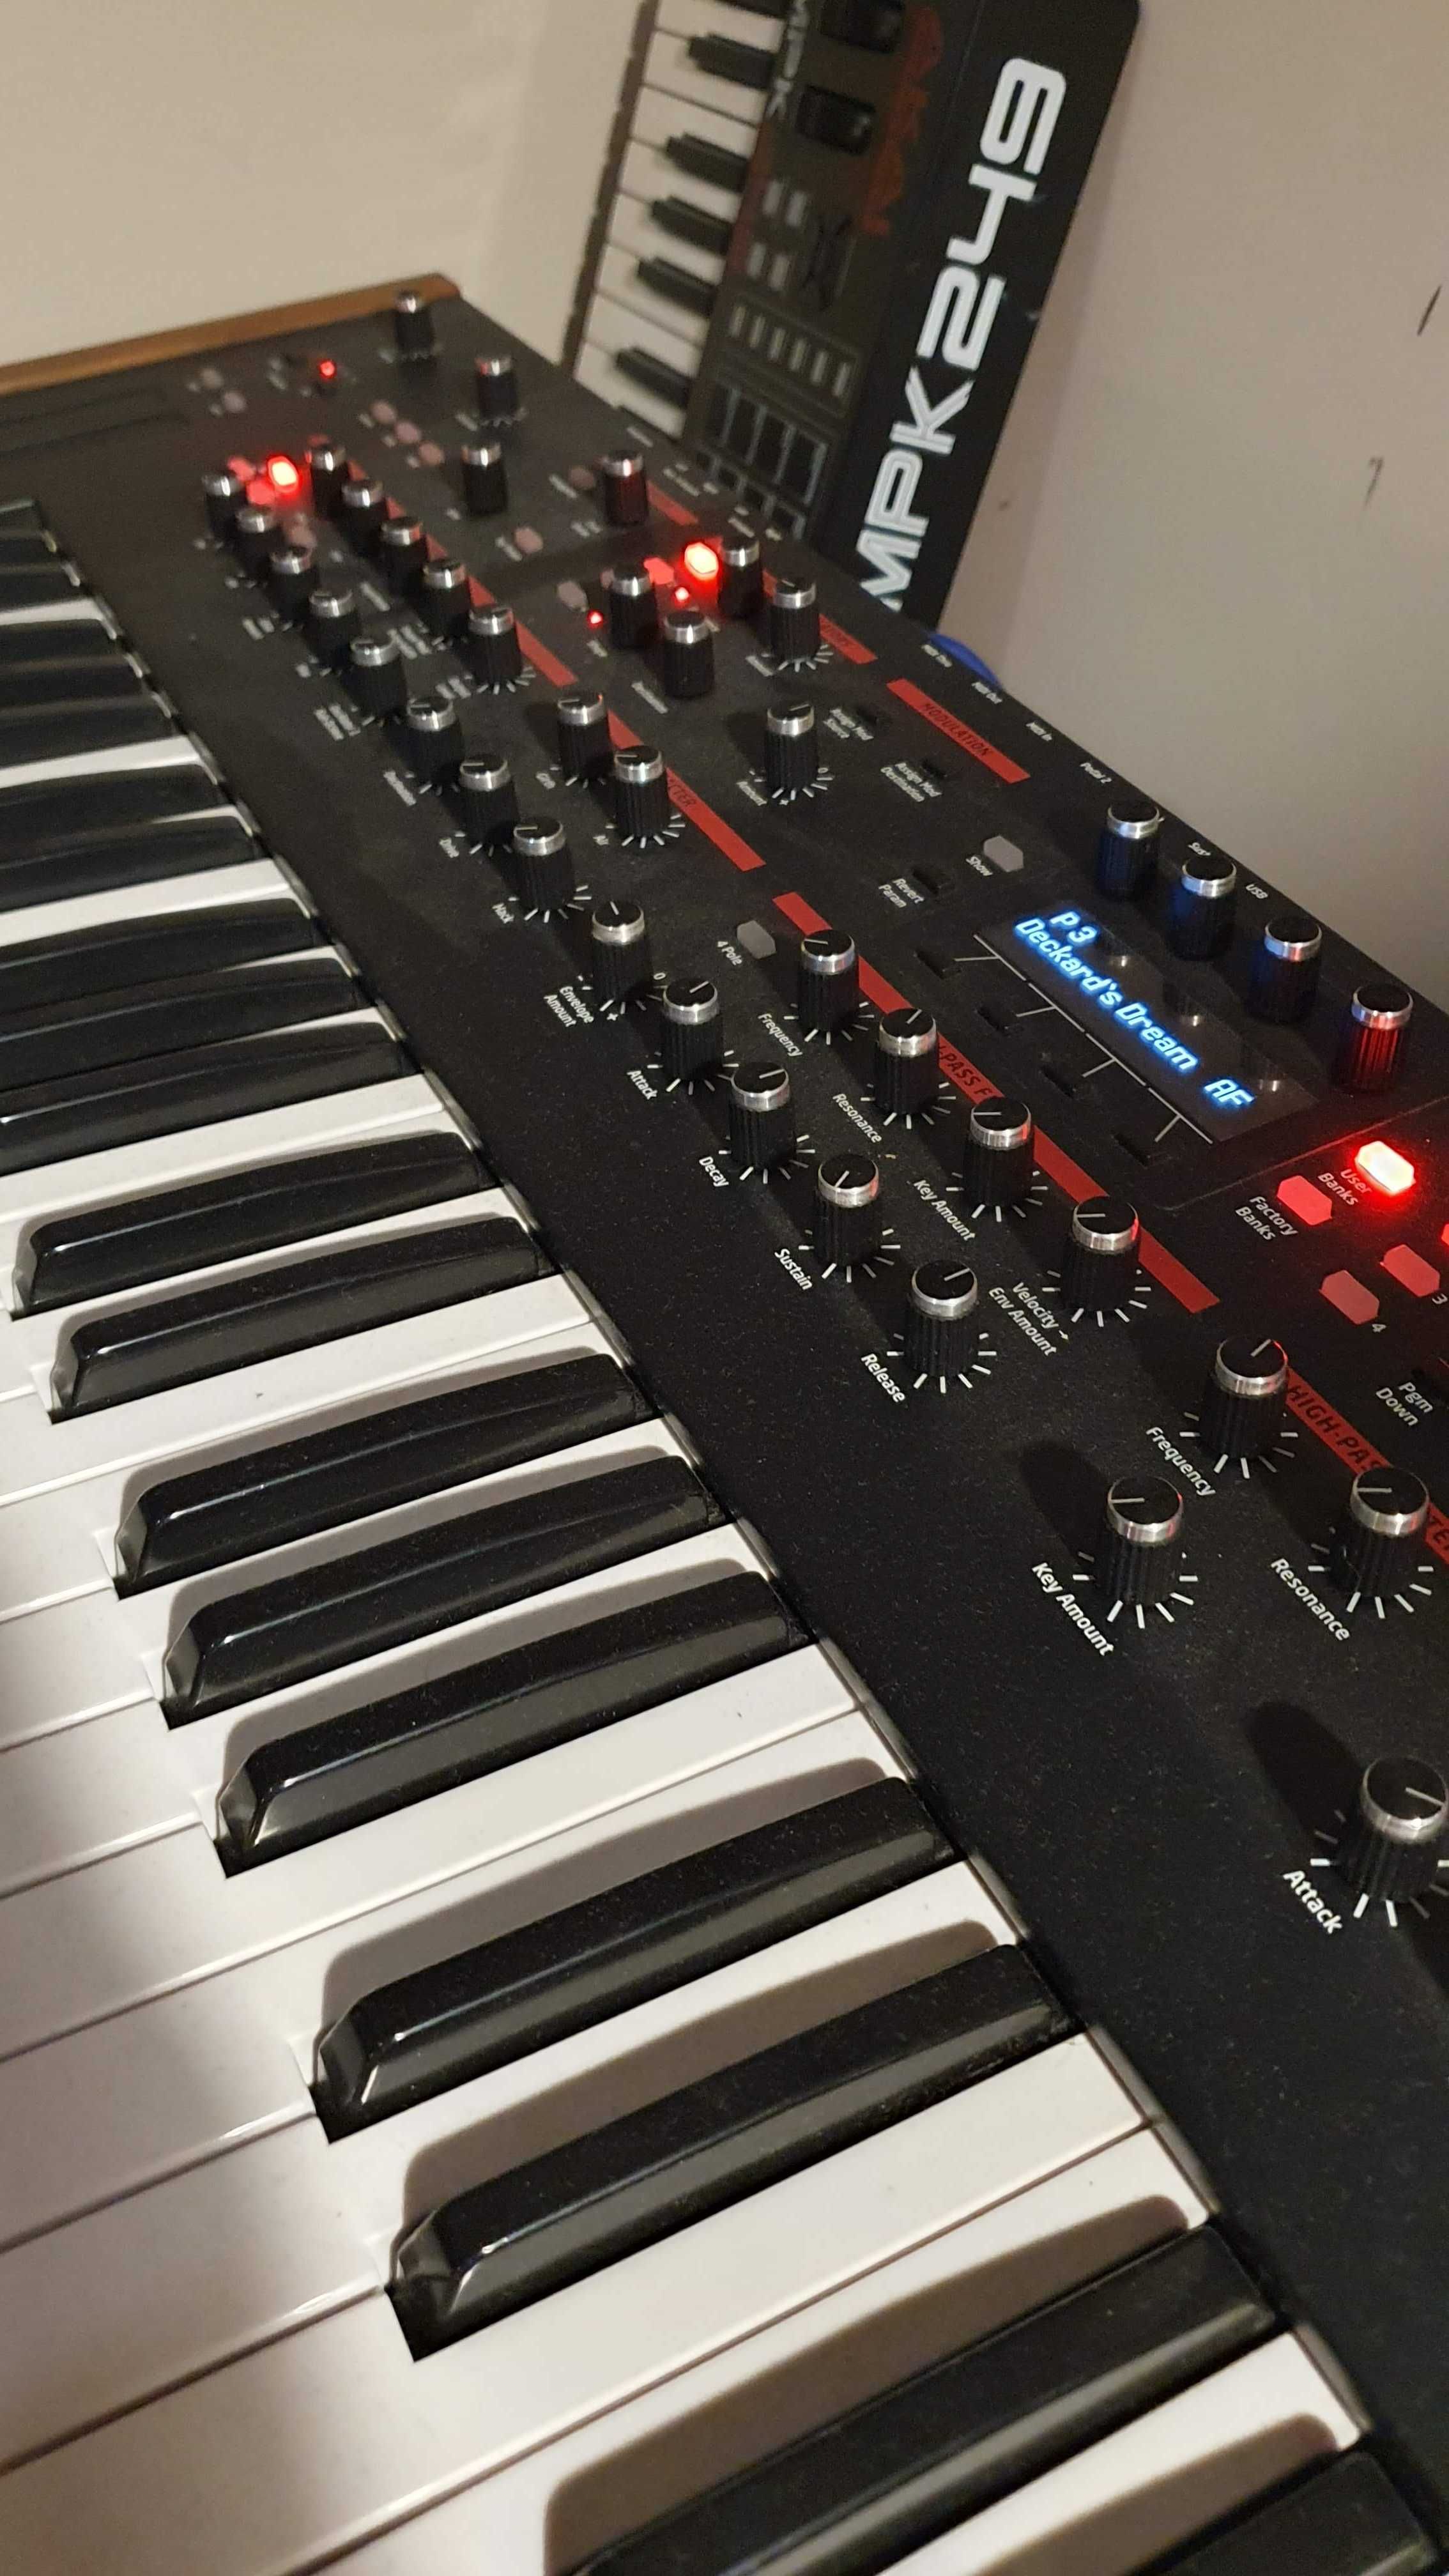 DSI Dave Smith Sequential Prophet 12